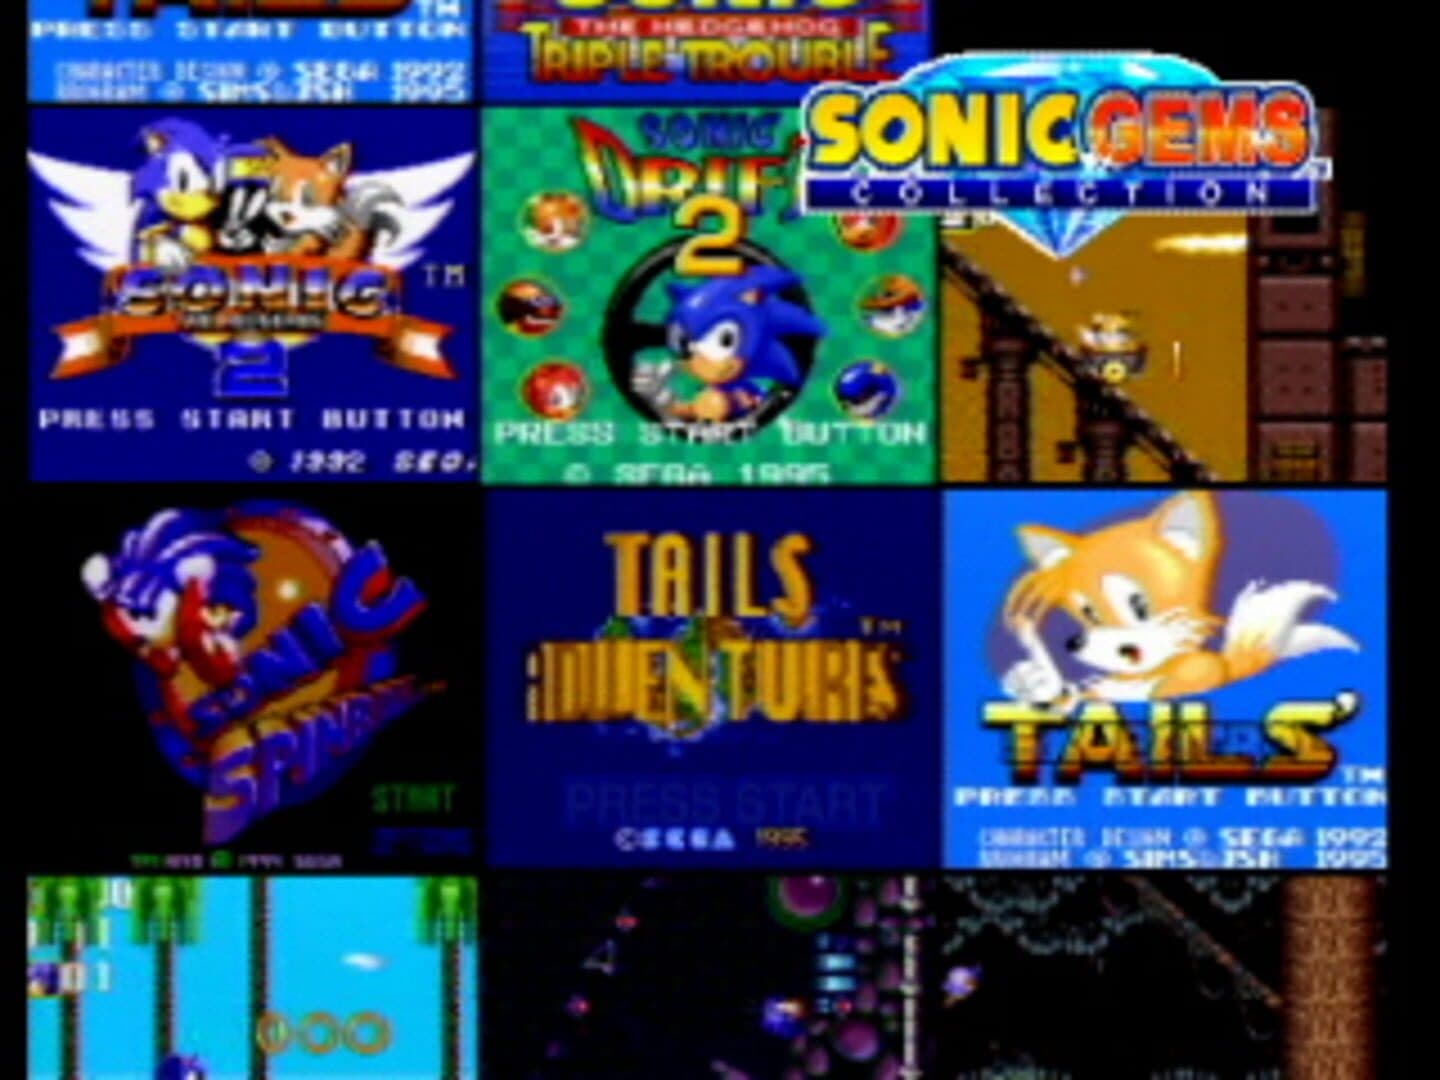 Sonic Gems Collection Image